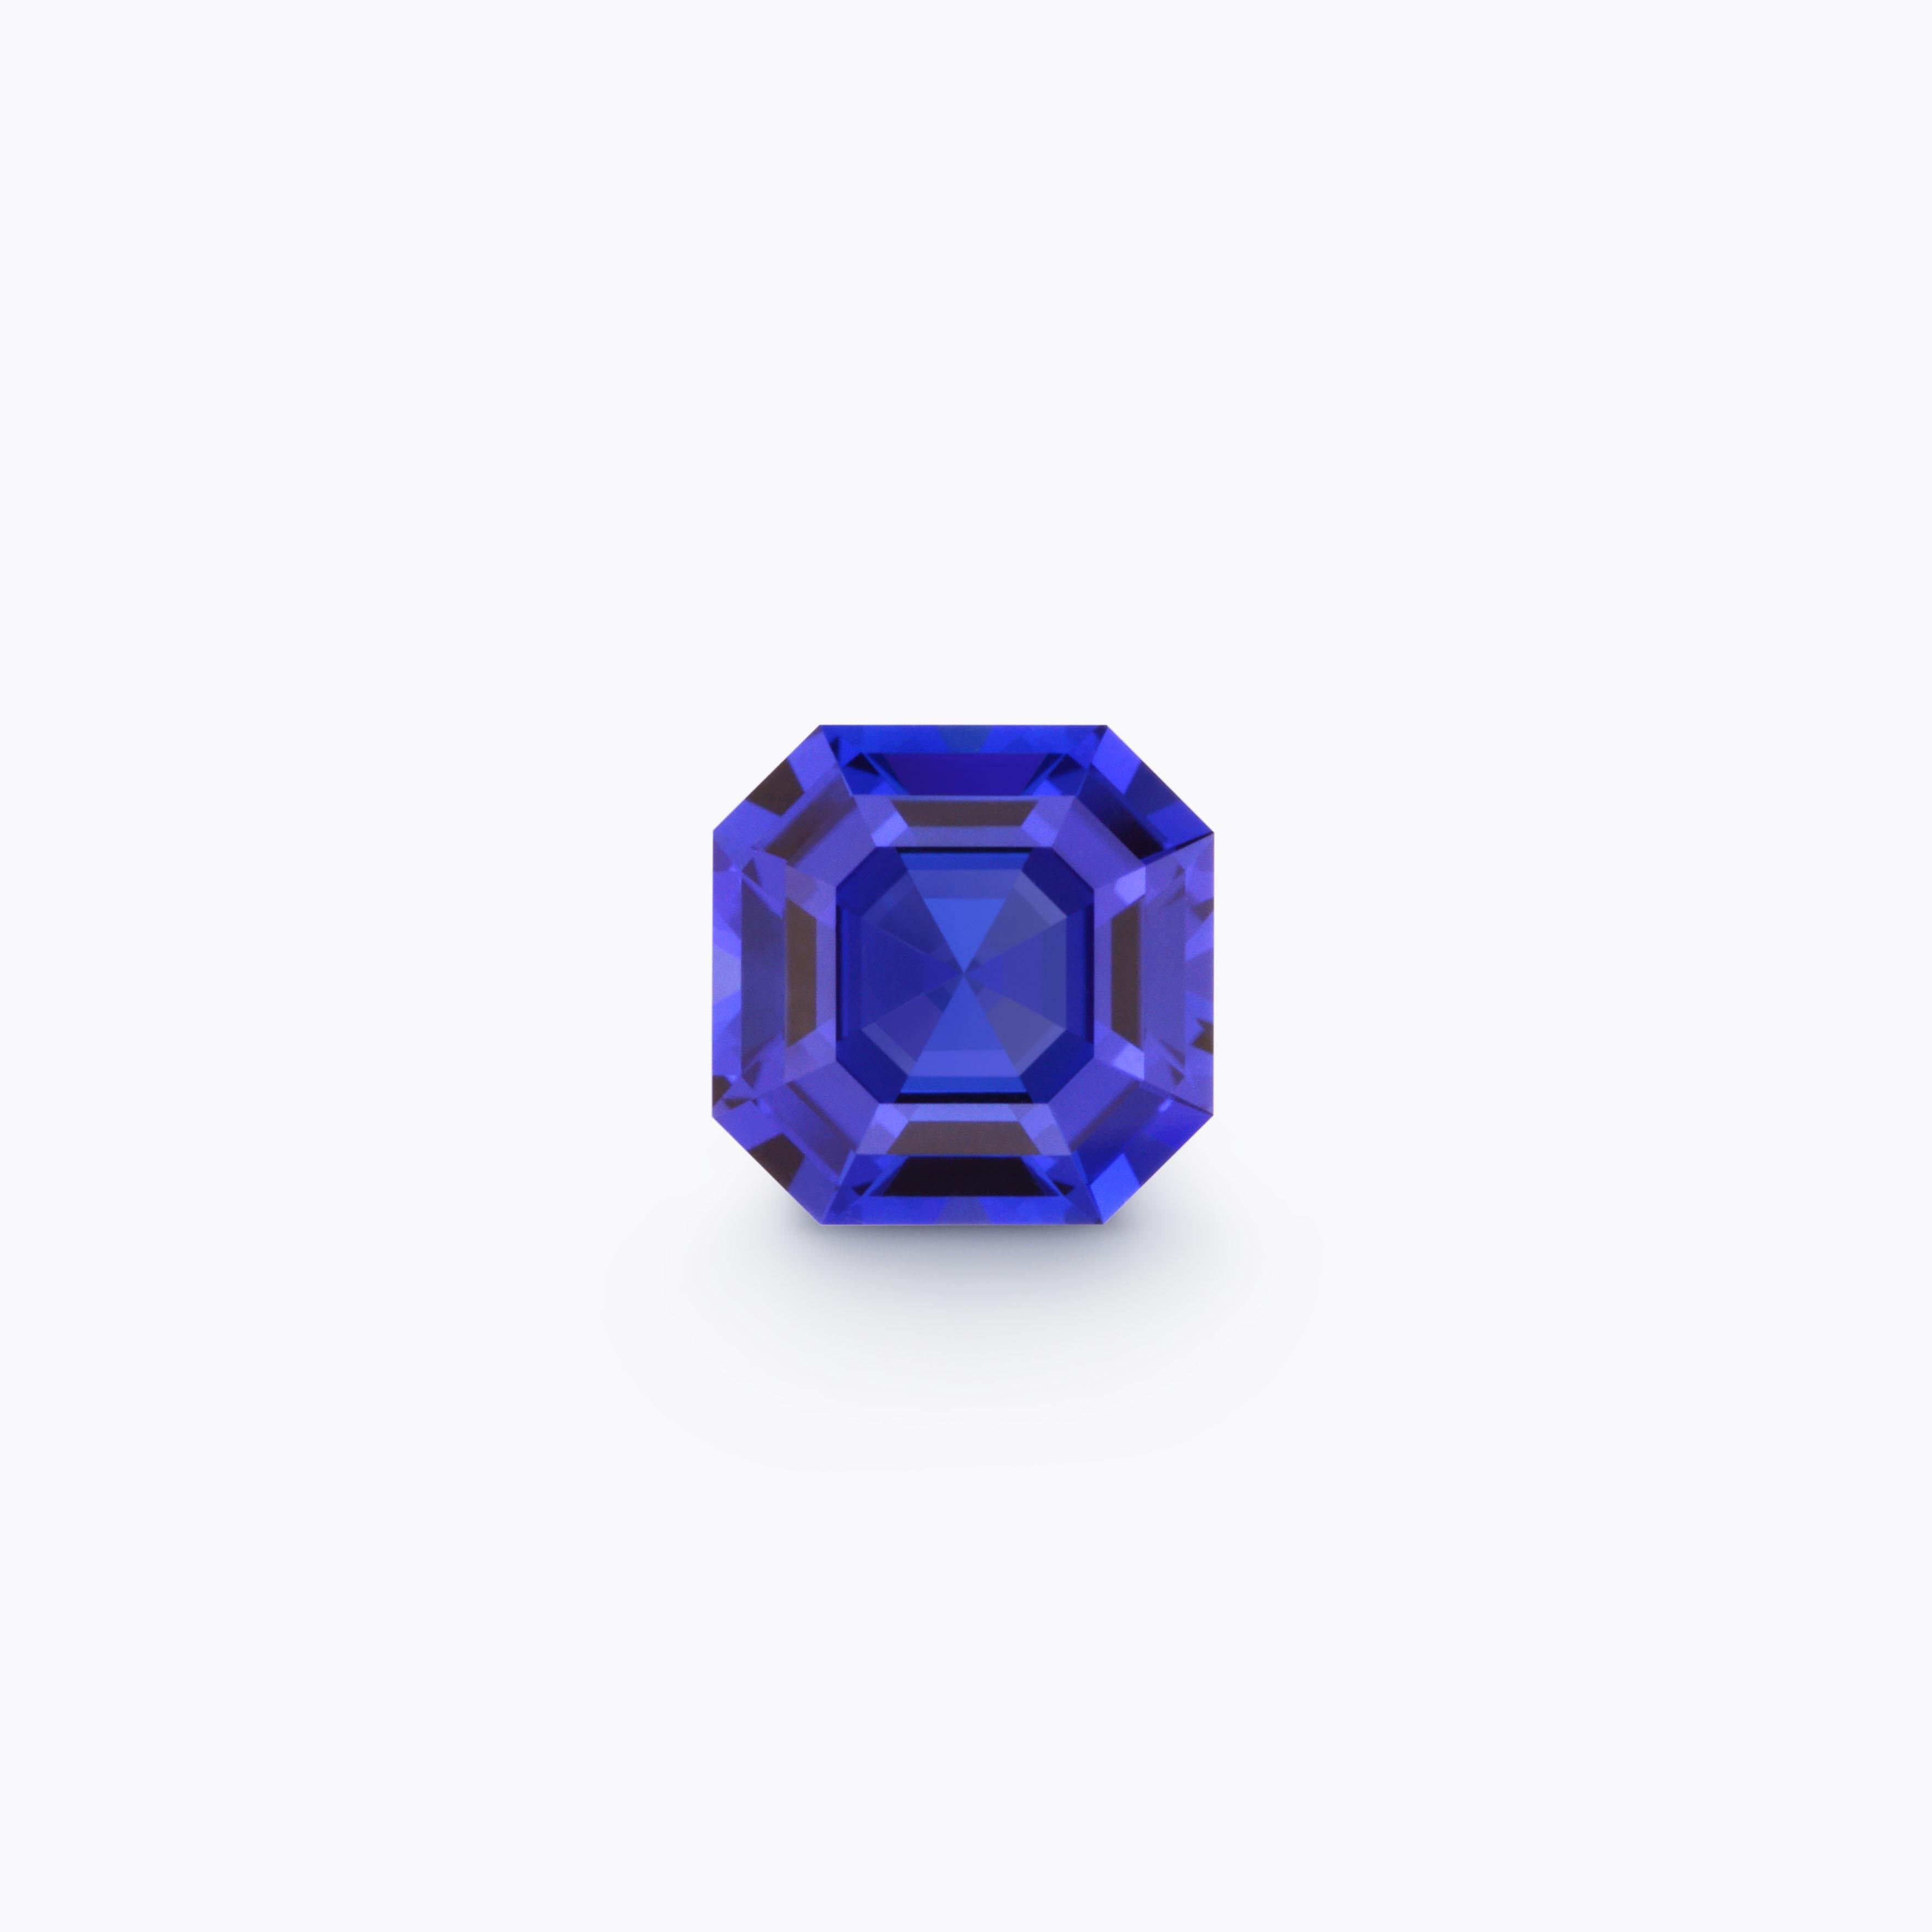 World class 10.41 carat square octagon, Asscher-cut Tanzanite gem, offered loose to a devoted gemstone collector.
Dimensions: 12.9 x 12.9 x 8.3 mm.
Returns are accepted and paid by us within 7 days of delivery.
We offer supreme custom jewelry work